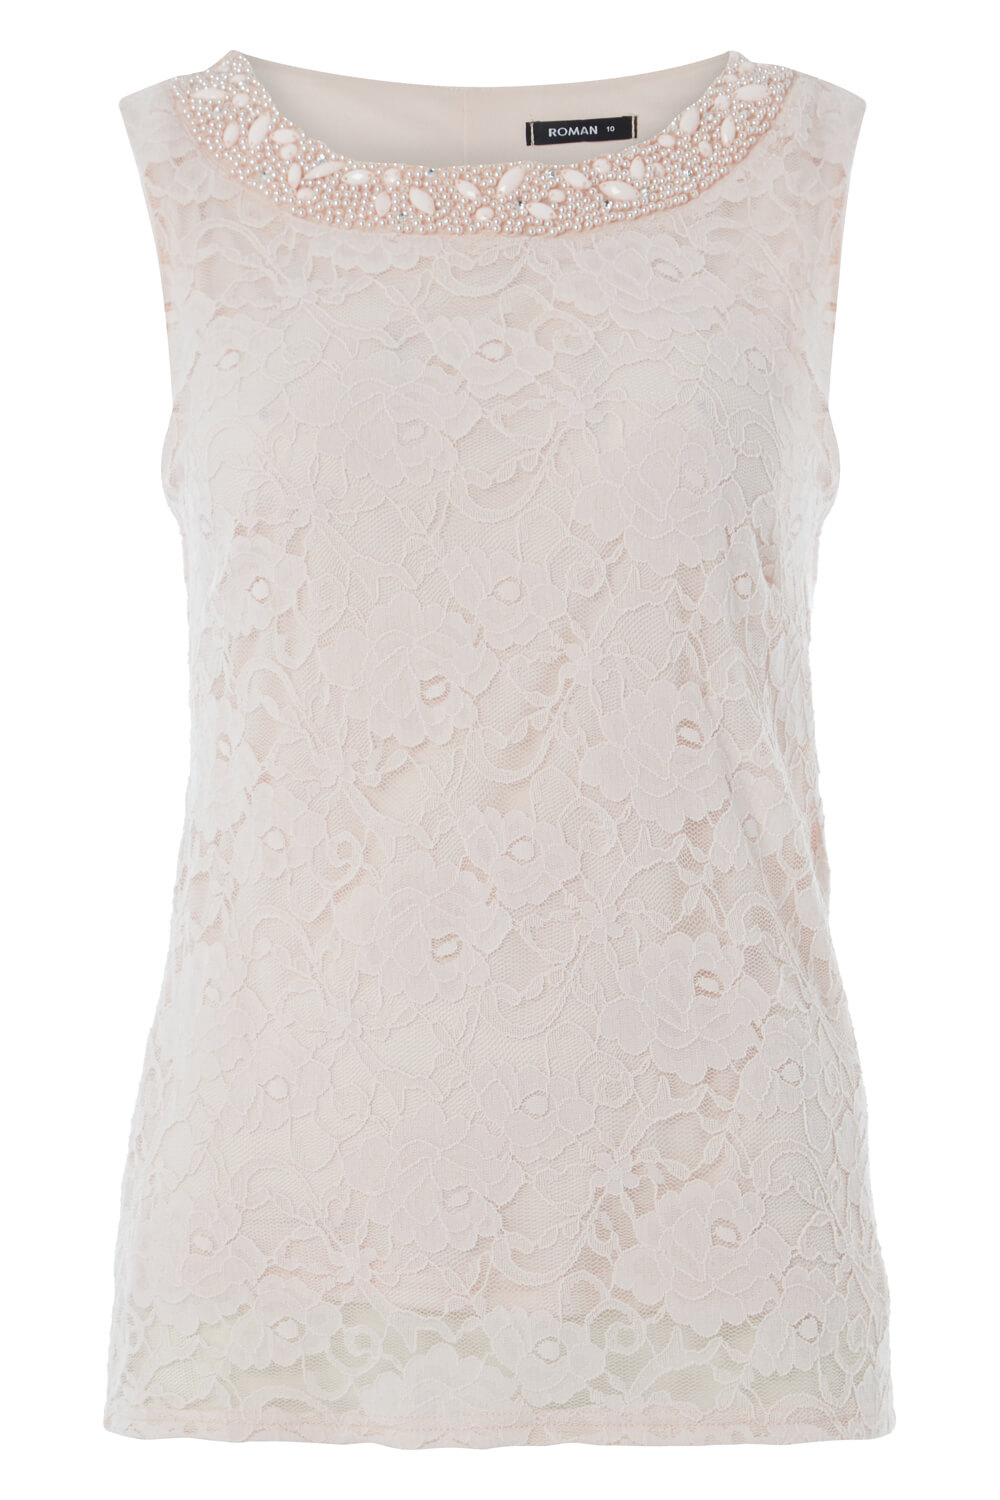 Embellished Lace Shell Top in Pink - Roman Originals UK